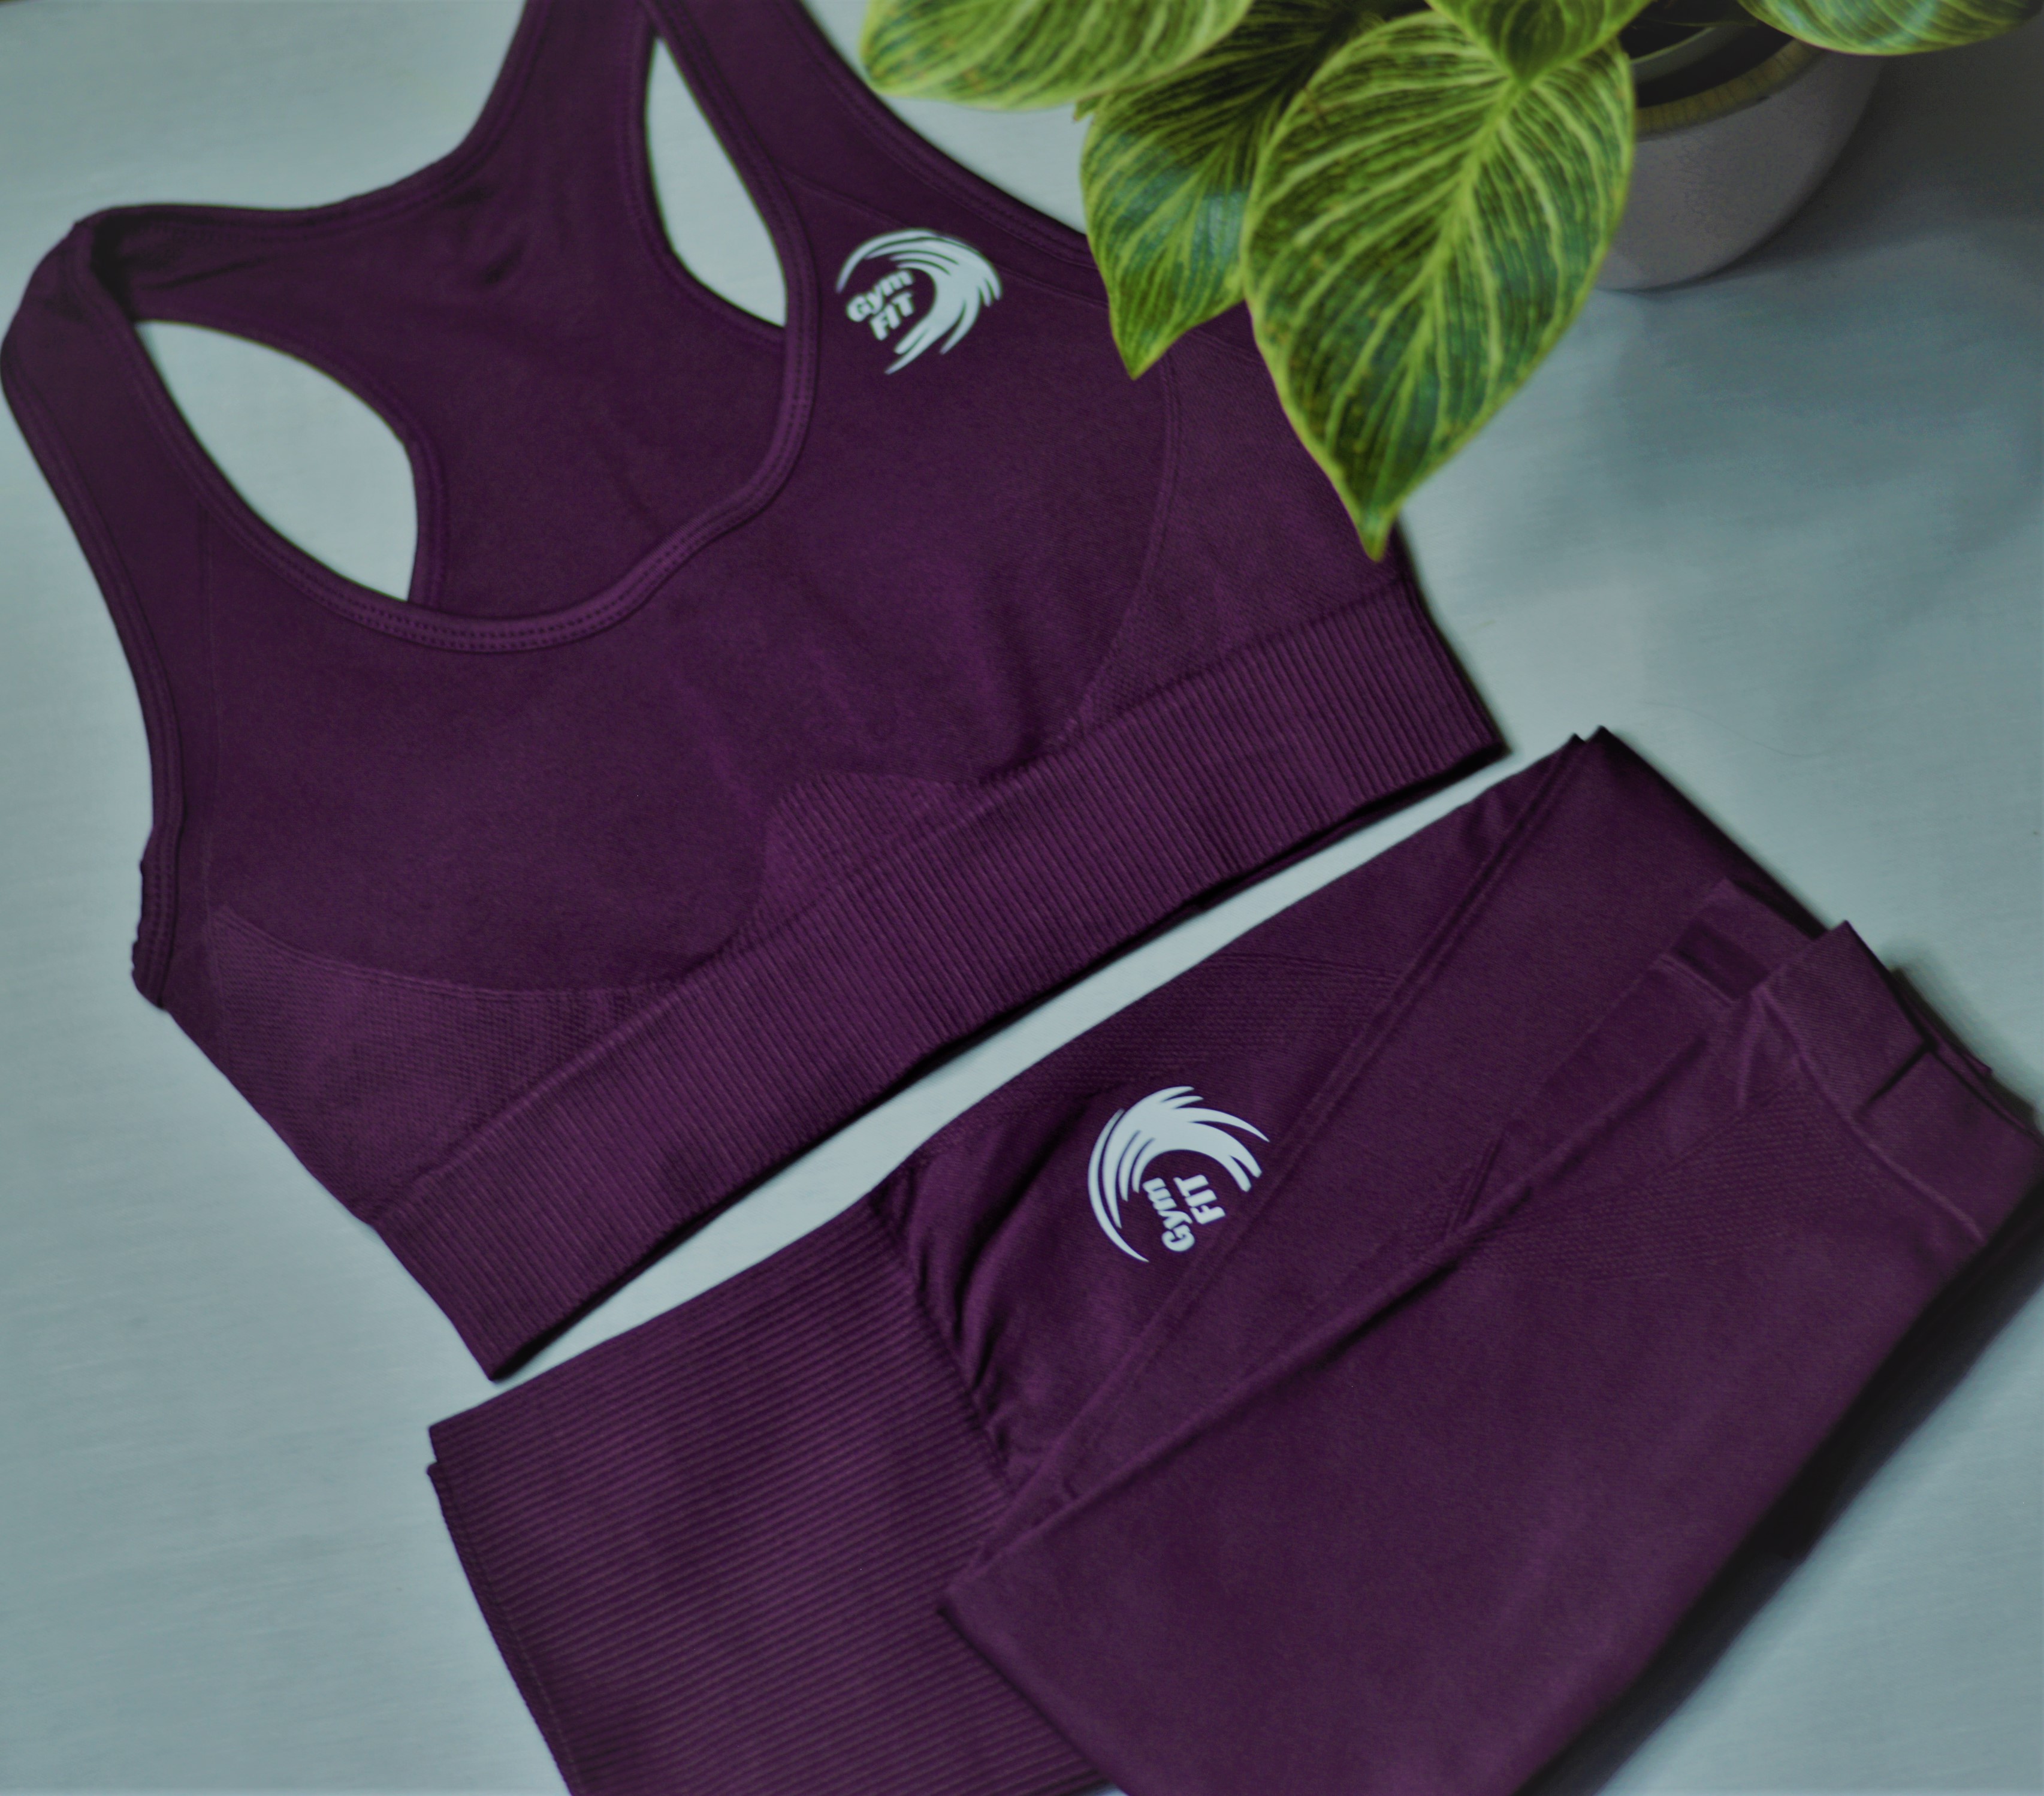 'BLOSSOM' Seamless set in Maroon